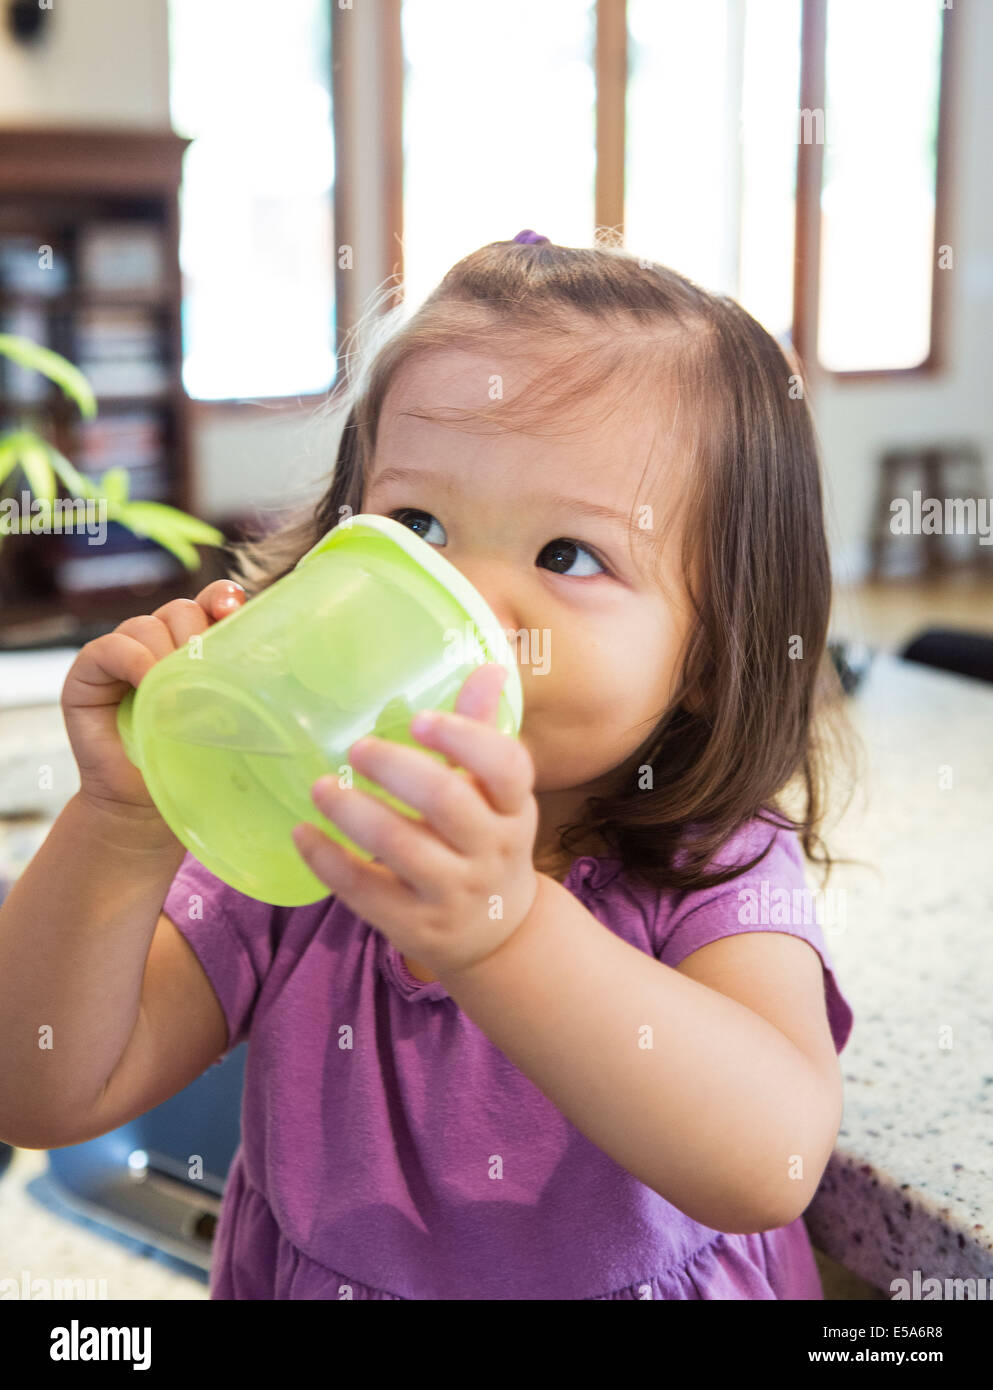 https://c8.alamy.com/comp/E5A6R8/mixed-race-girl-drinking-from-sippy-cup-in-kitchen-E5A6R8.jpg